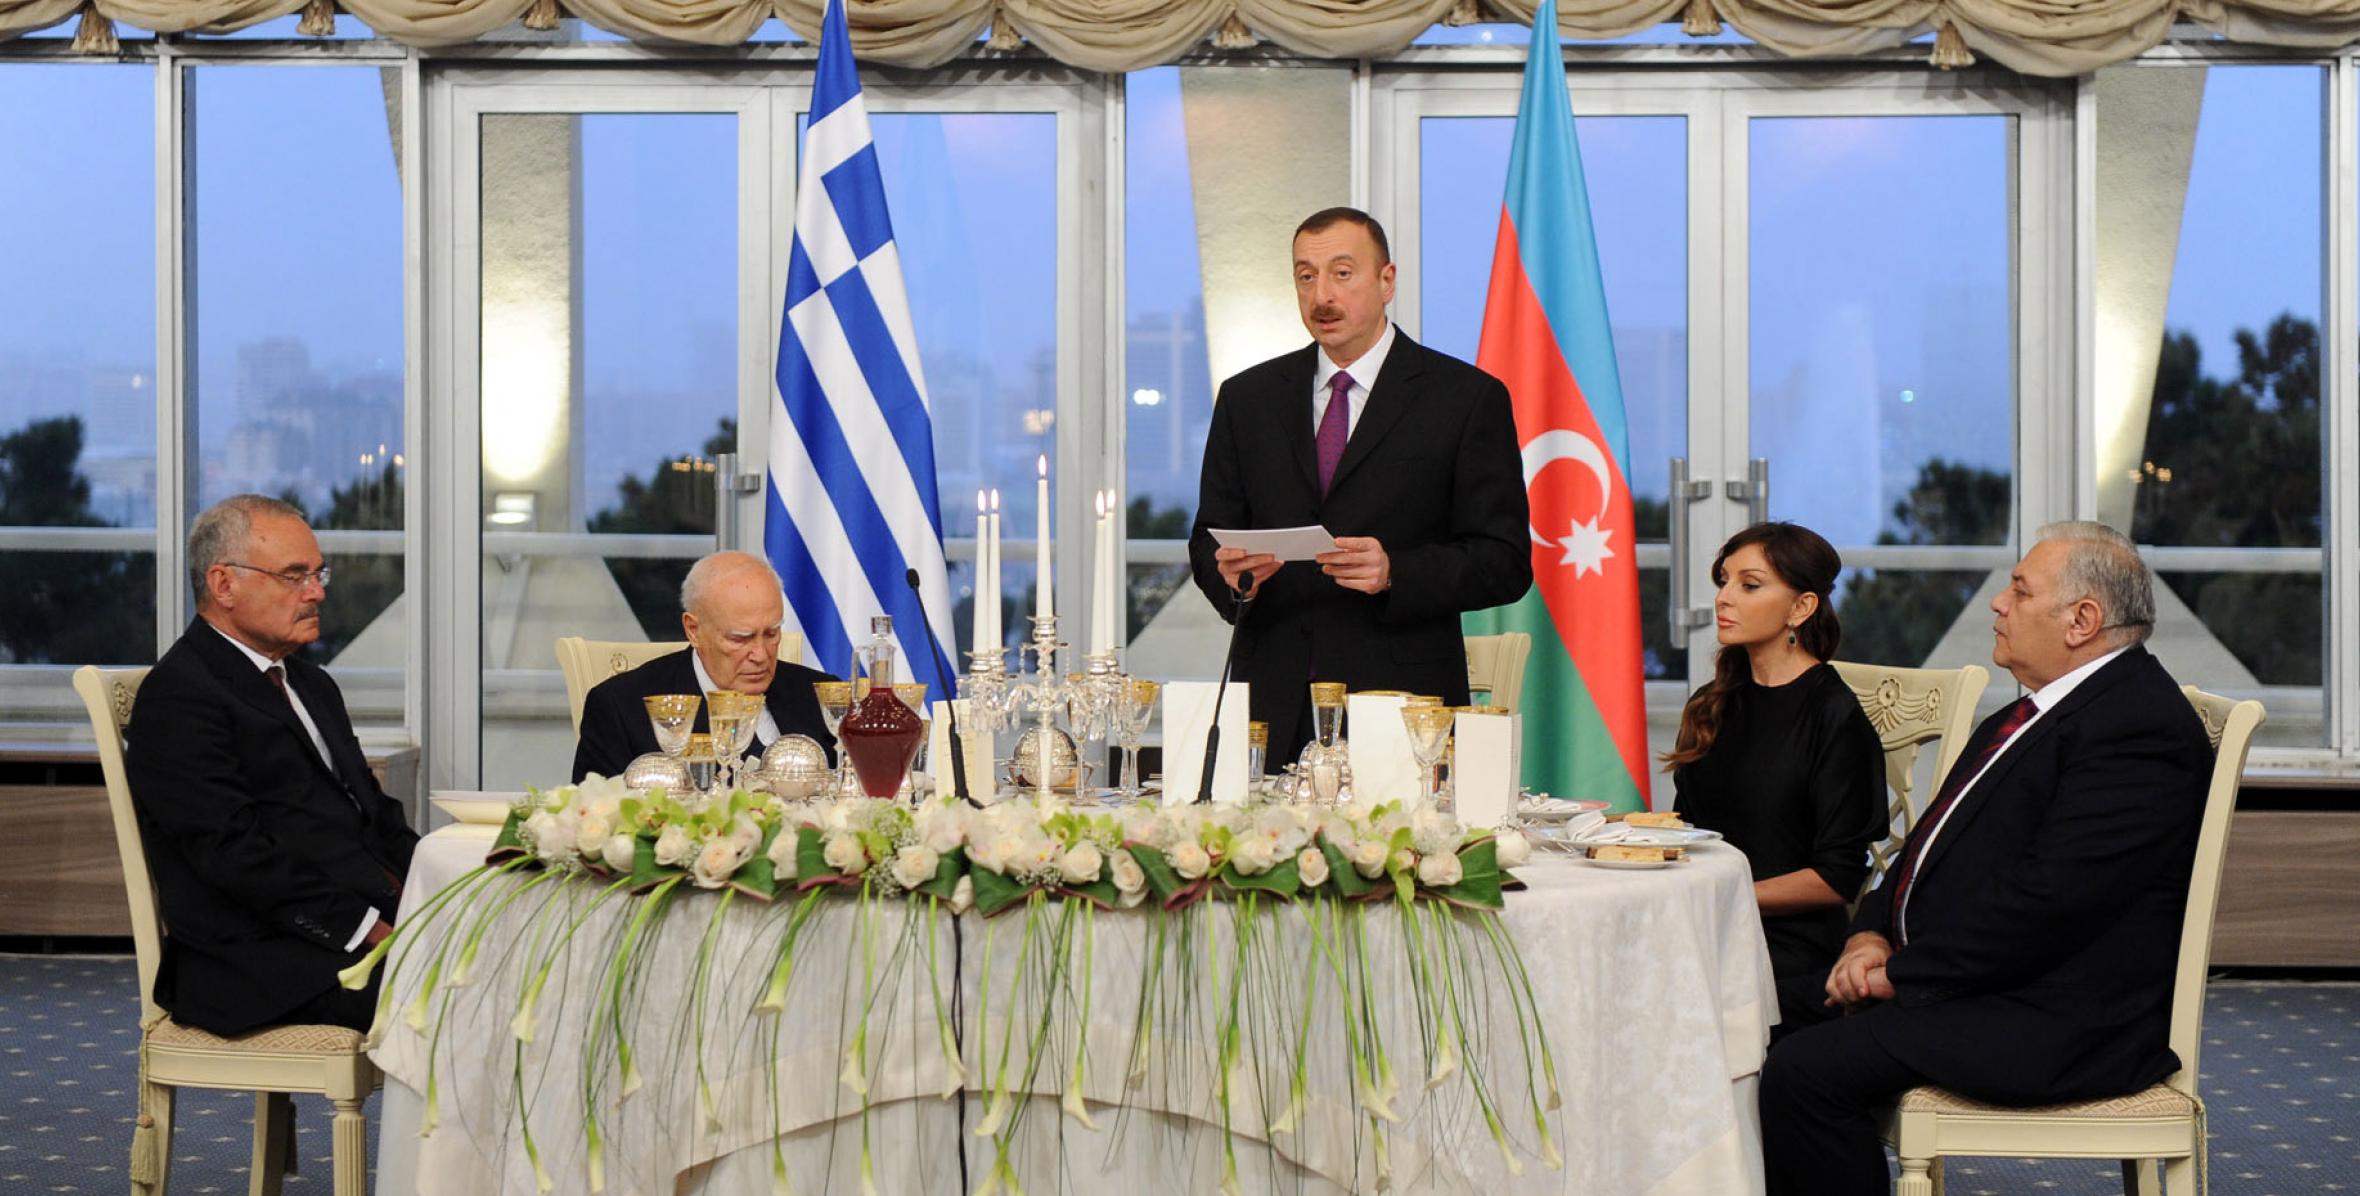 Speech by Ilham Aliyev at a reception in honor of the official visit of the President of Greece Karolos Papoulias